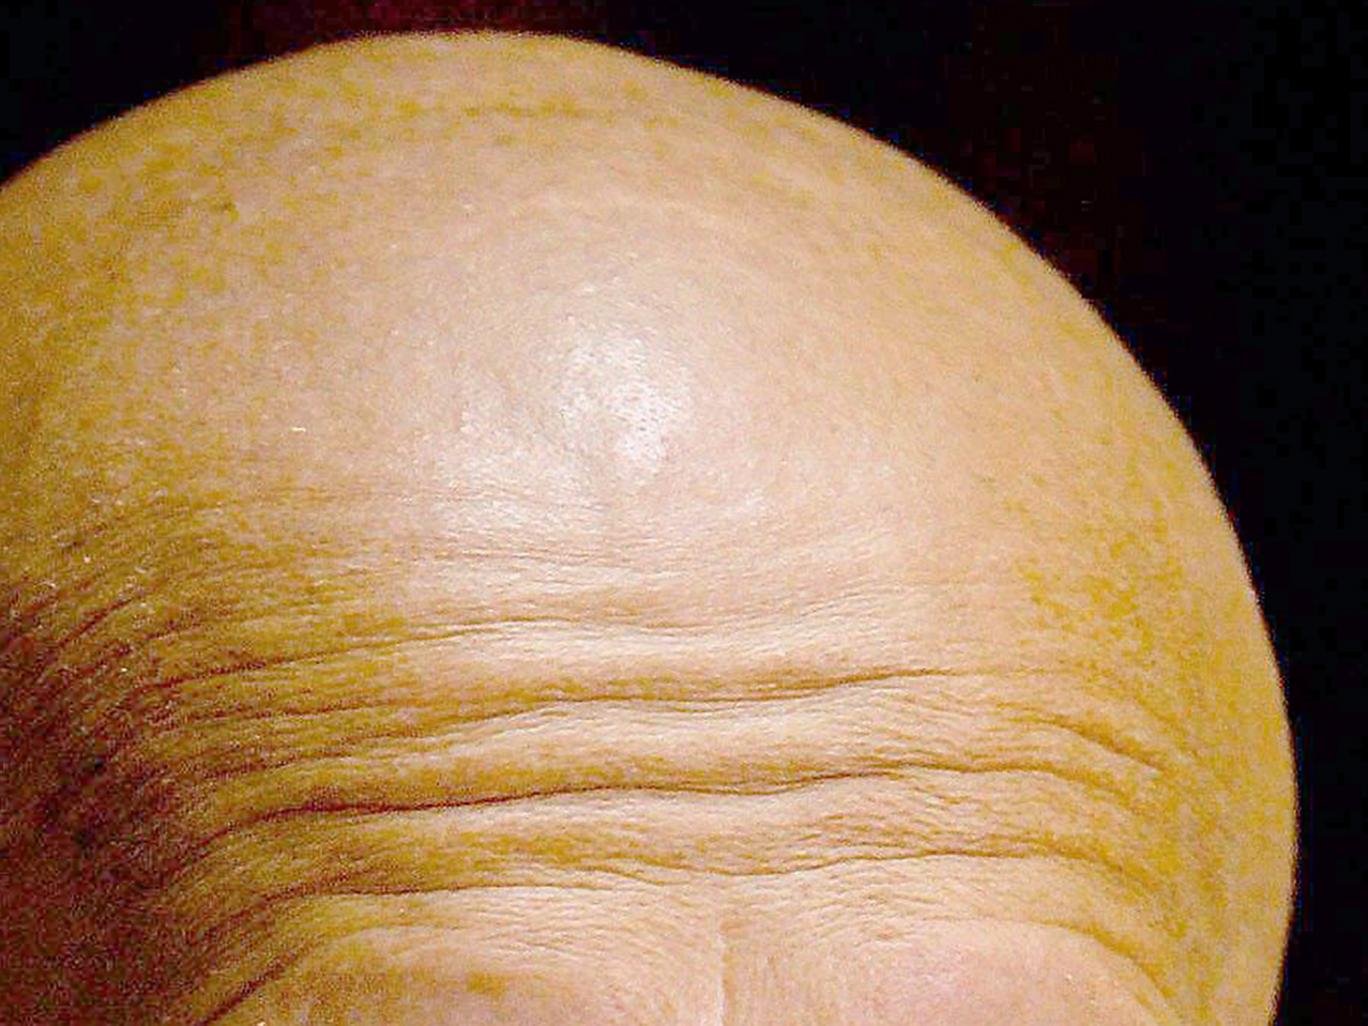 New baldness cause accidentally discovered by scientists could lead to hair loss treatment